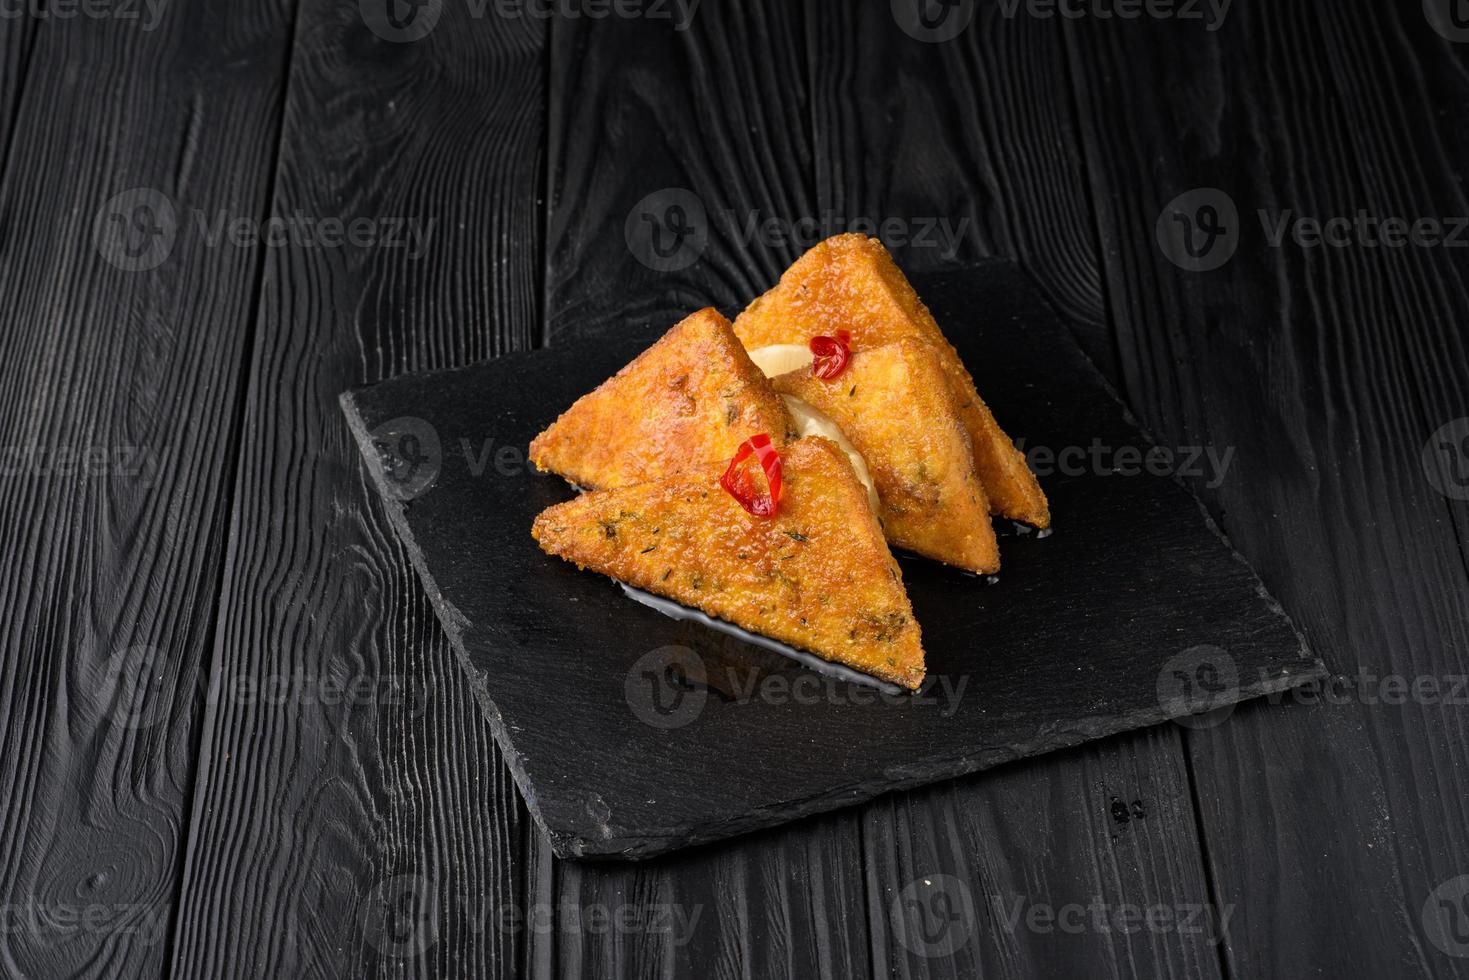 Fried tofu with pineapple on a black wooden background. photo